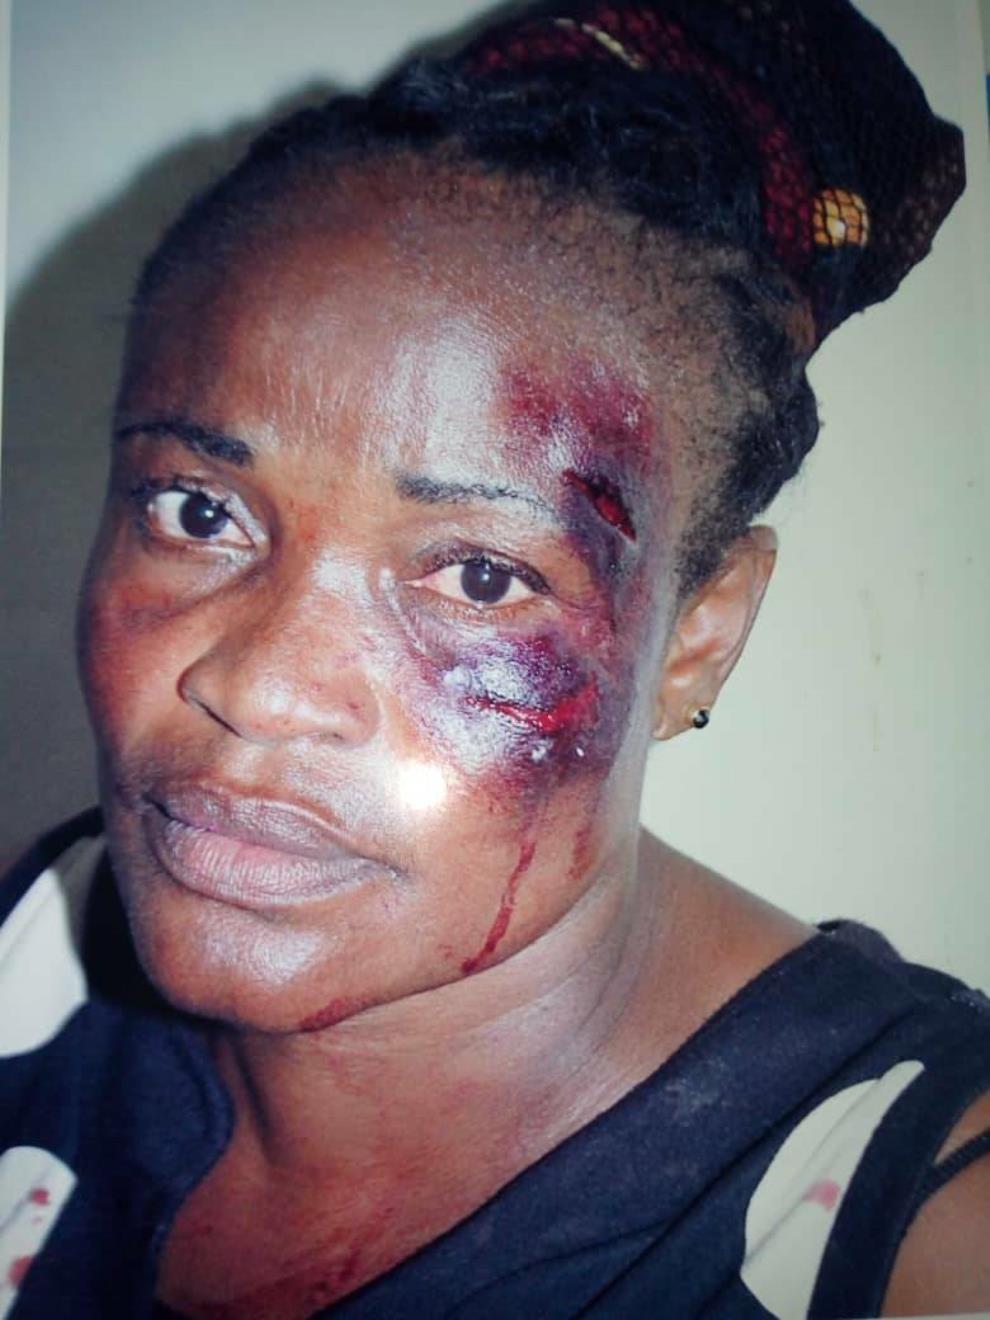 NPP Polling Station Executive Fights For Justice After MP’s Boy Brutalized Her